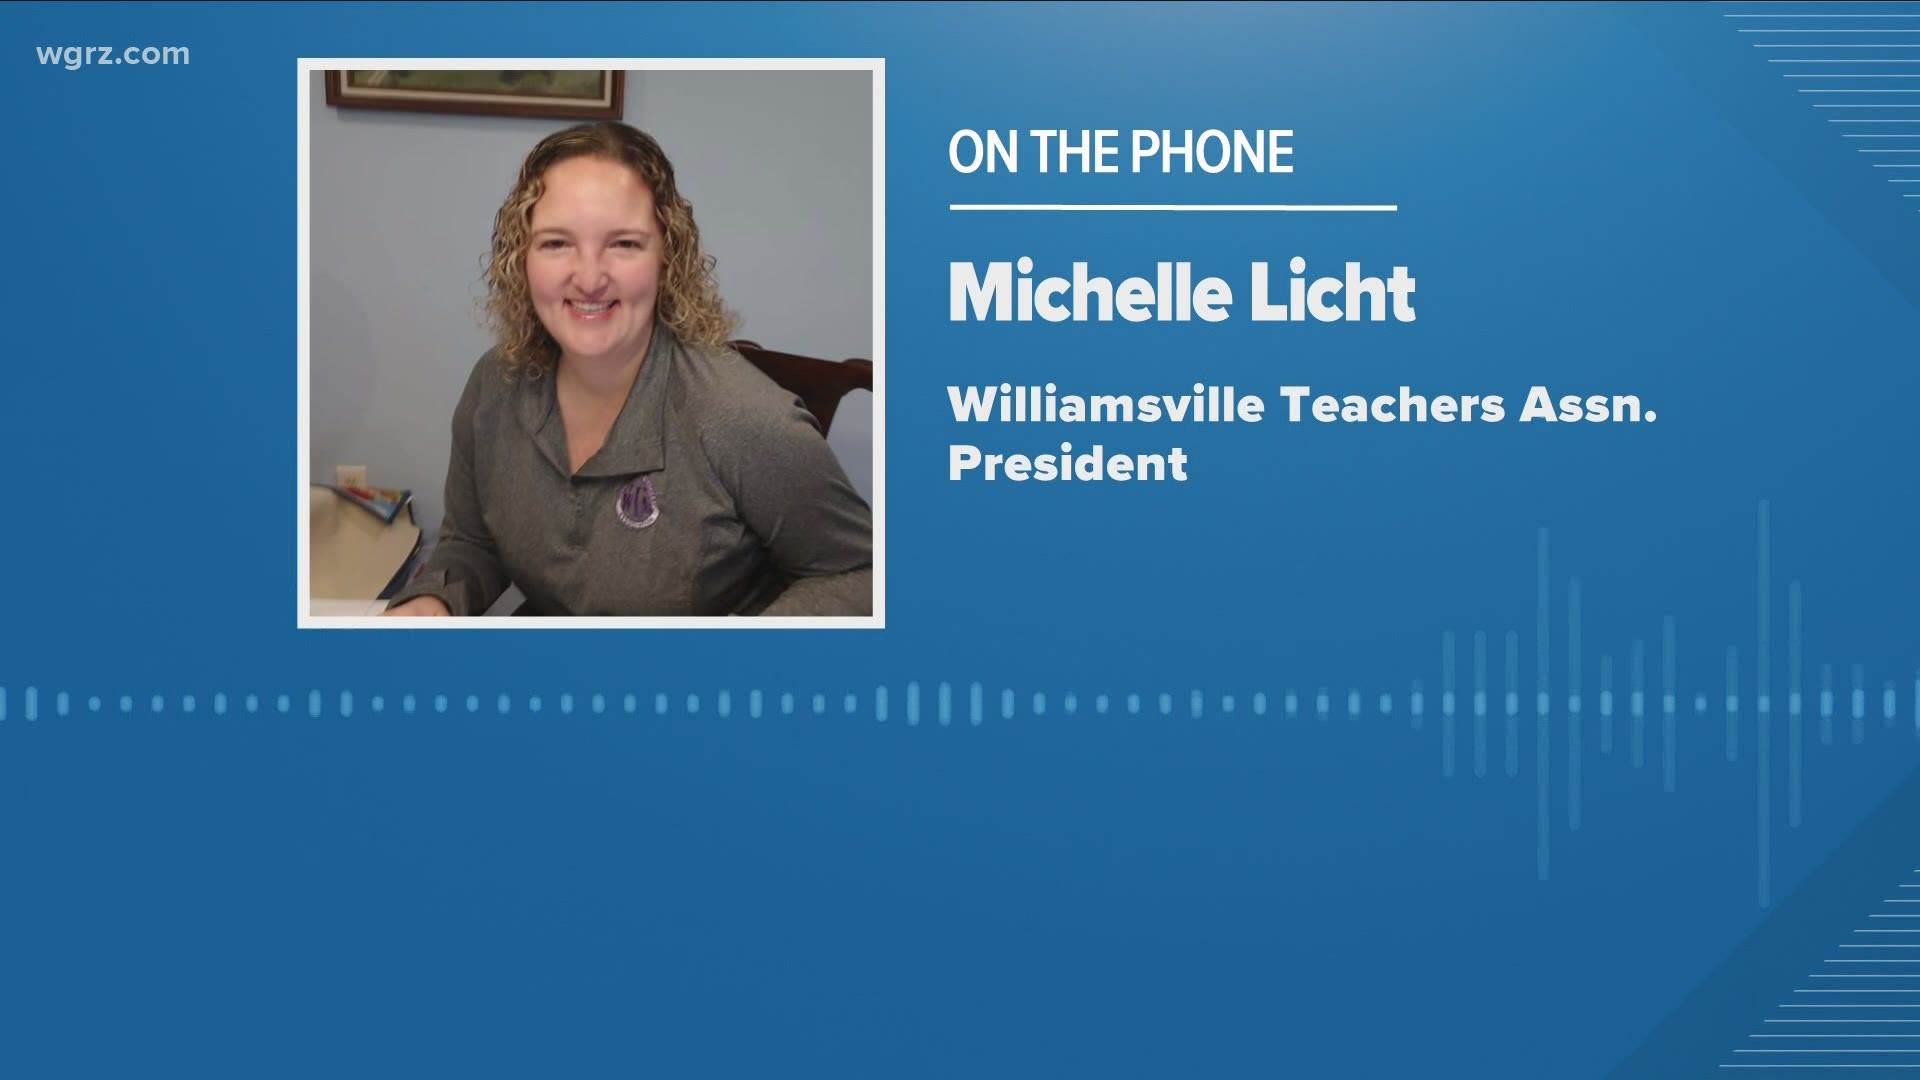 The Williamsville Teachers Association and others had criticized Martzloff when he sent out a pre-recorded video message on Friday noting a delay in remote learning.